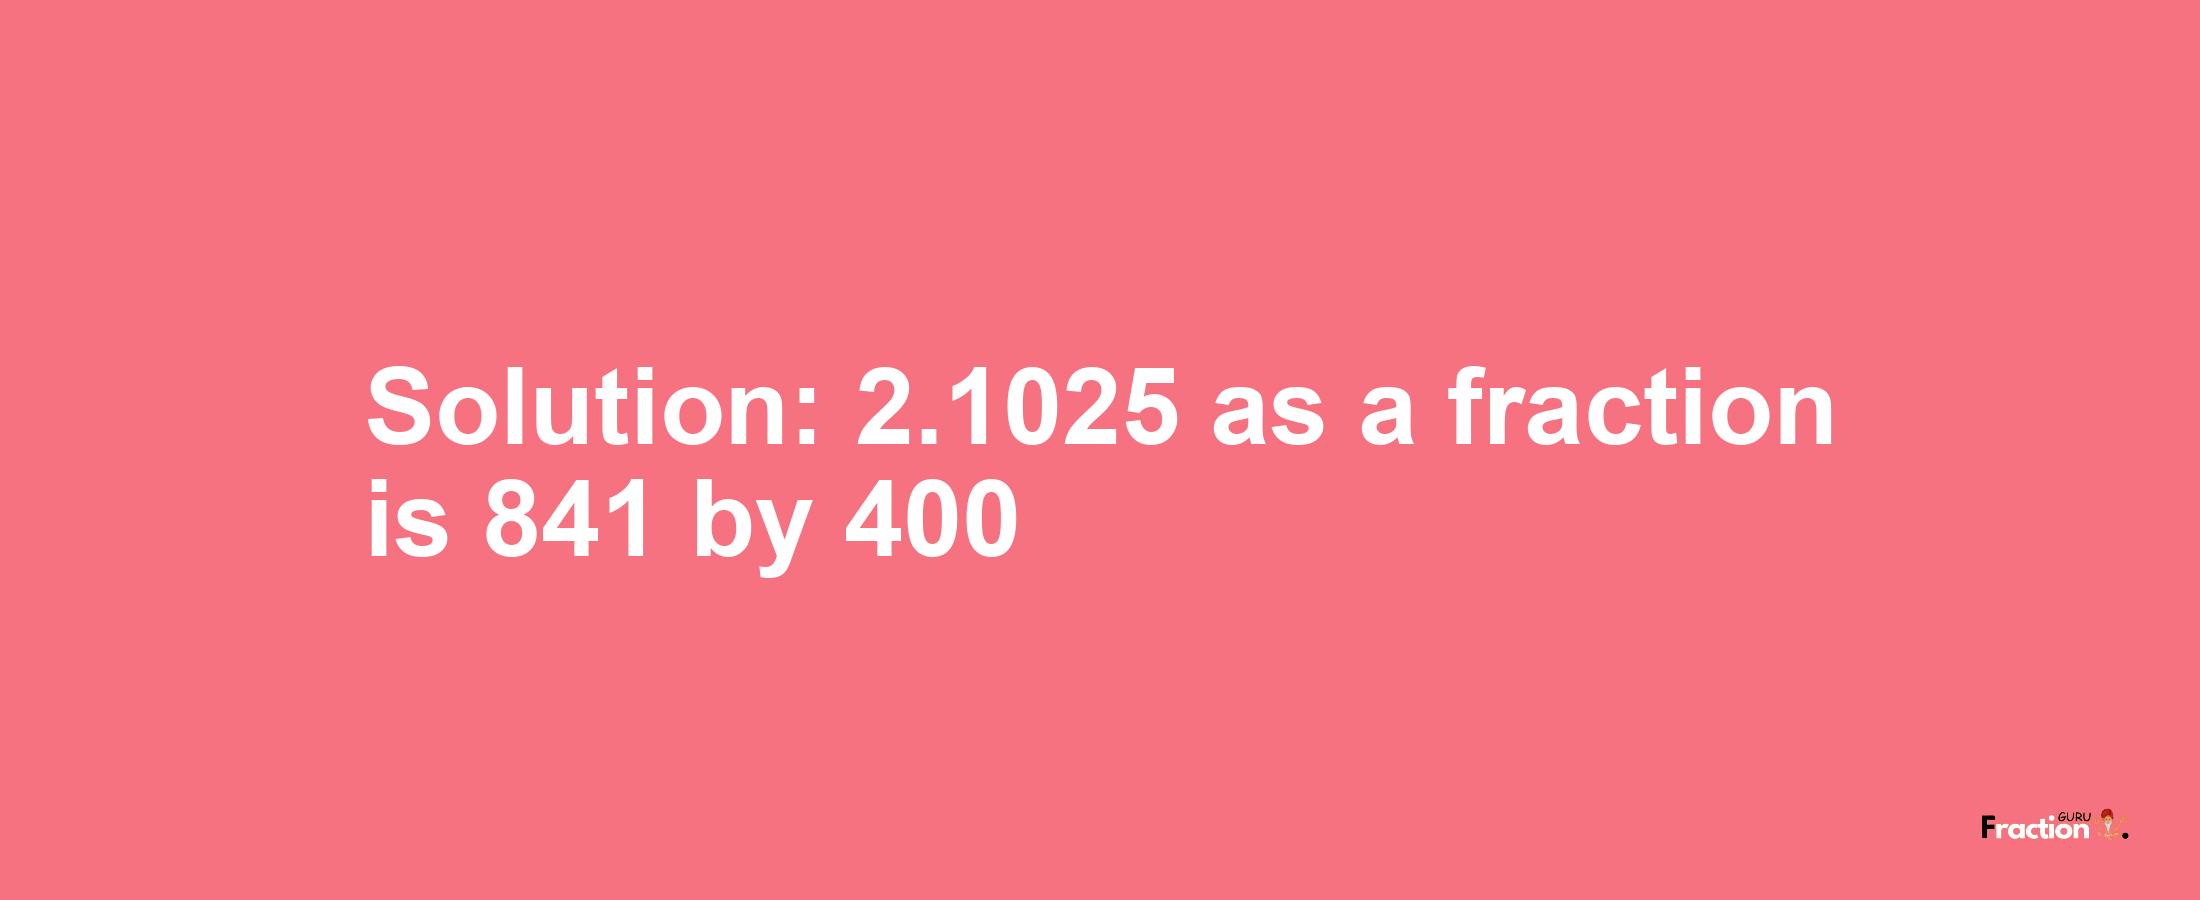 Solution:2.1025 as a fraction is 841/400